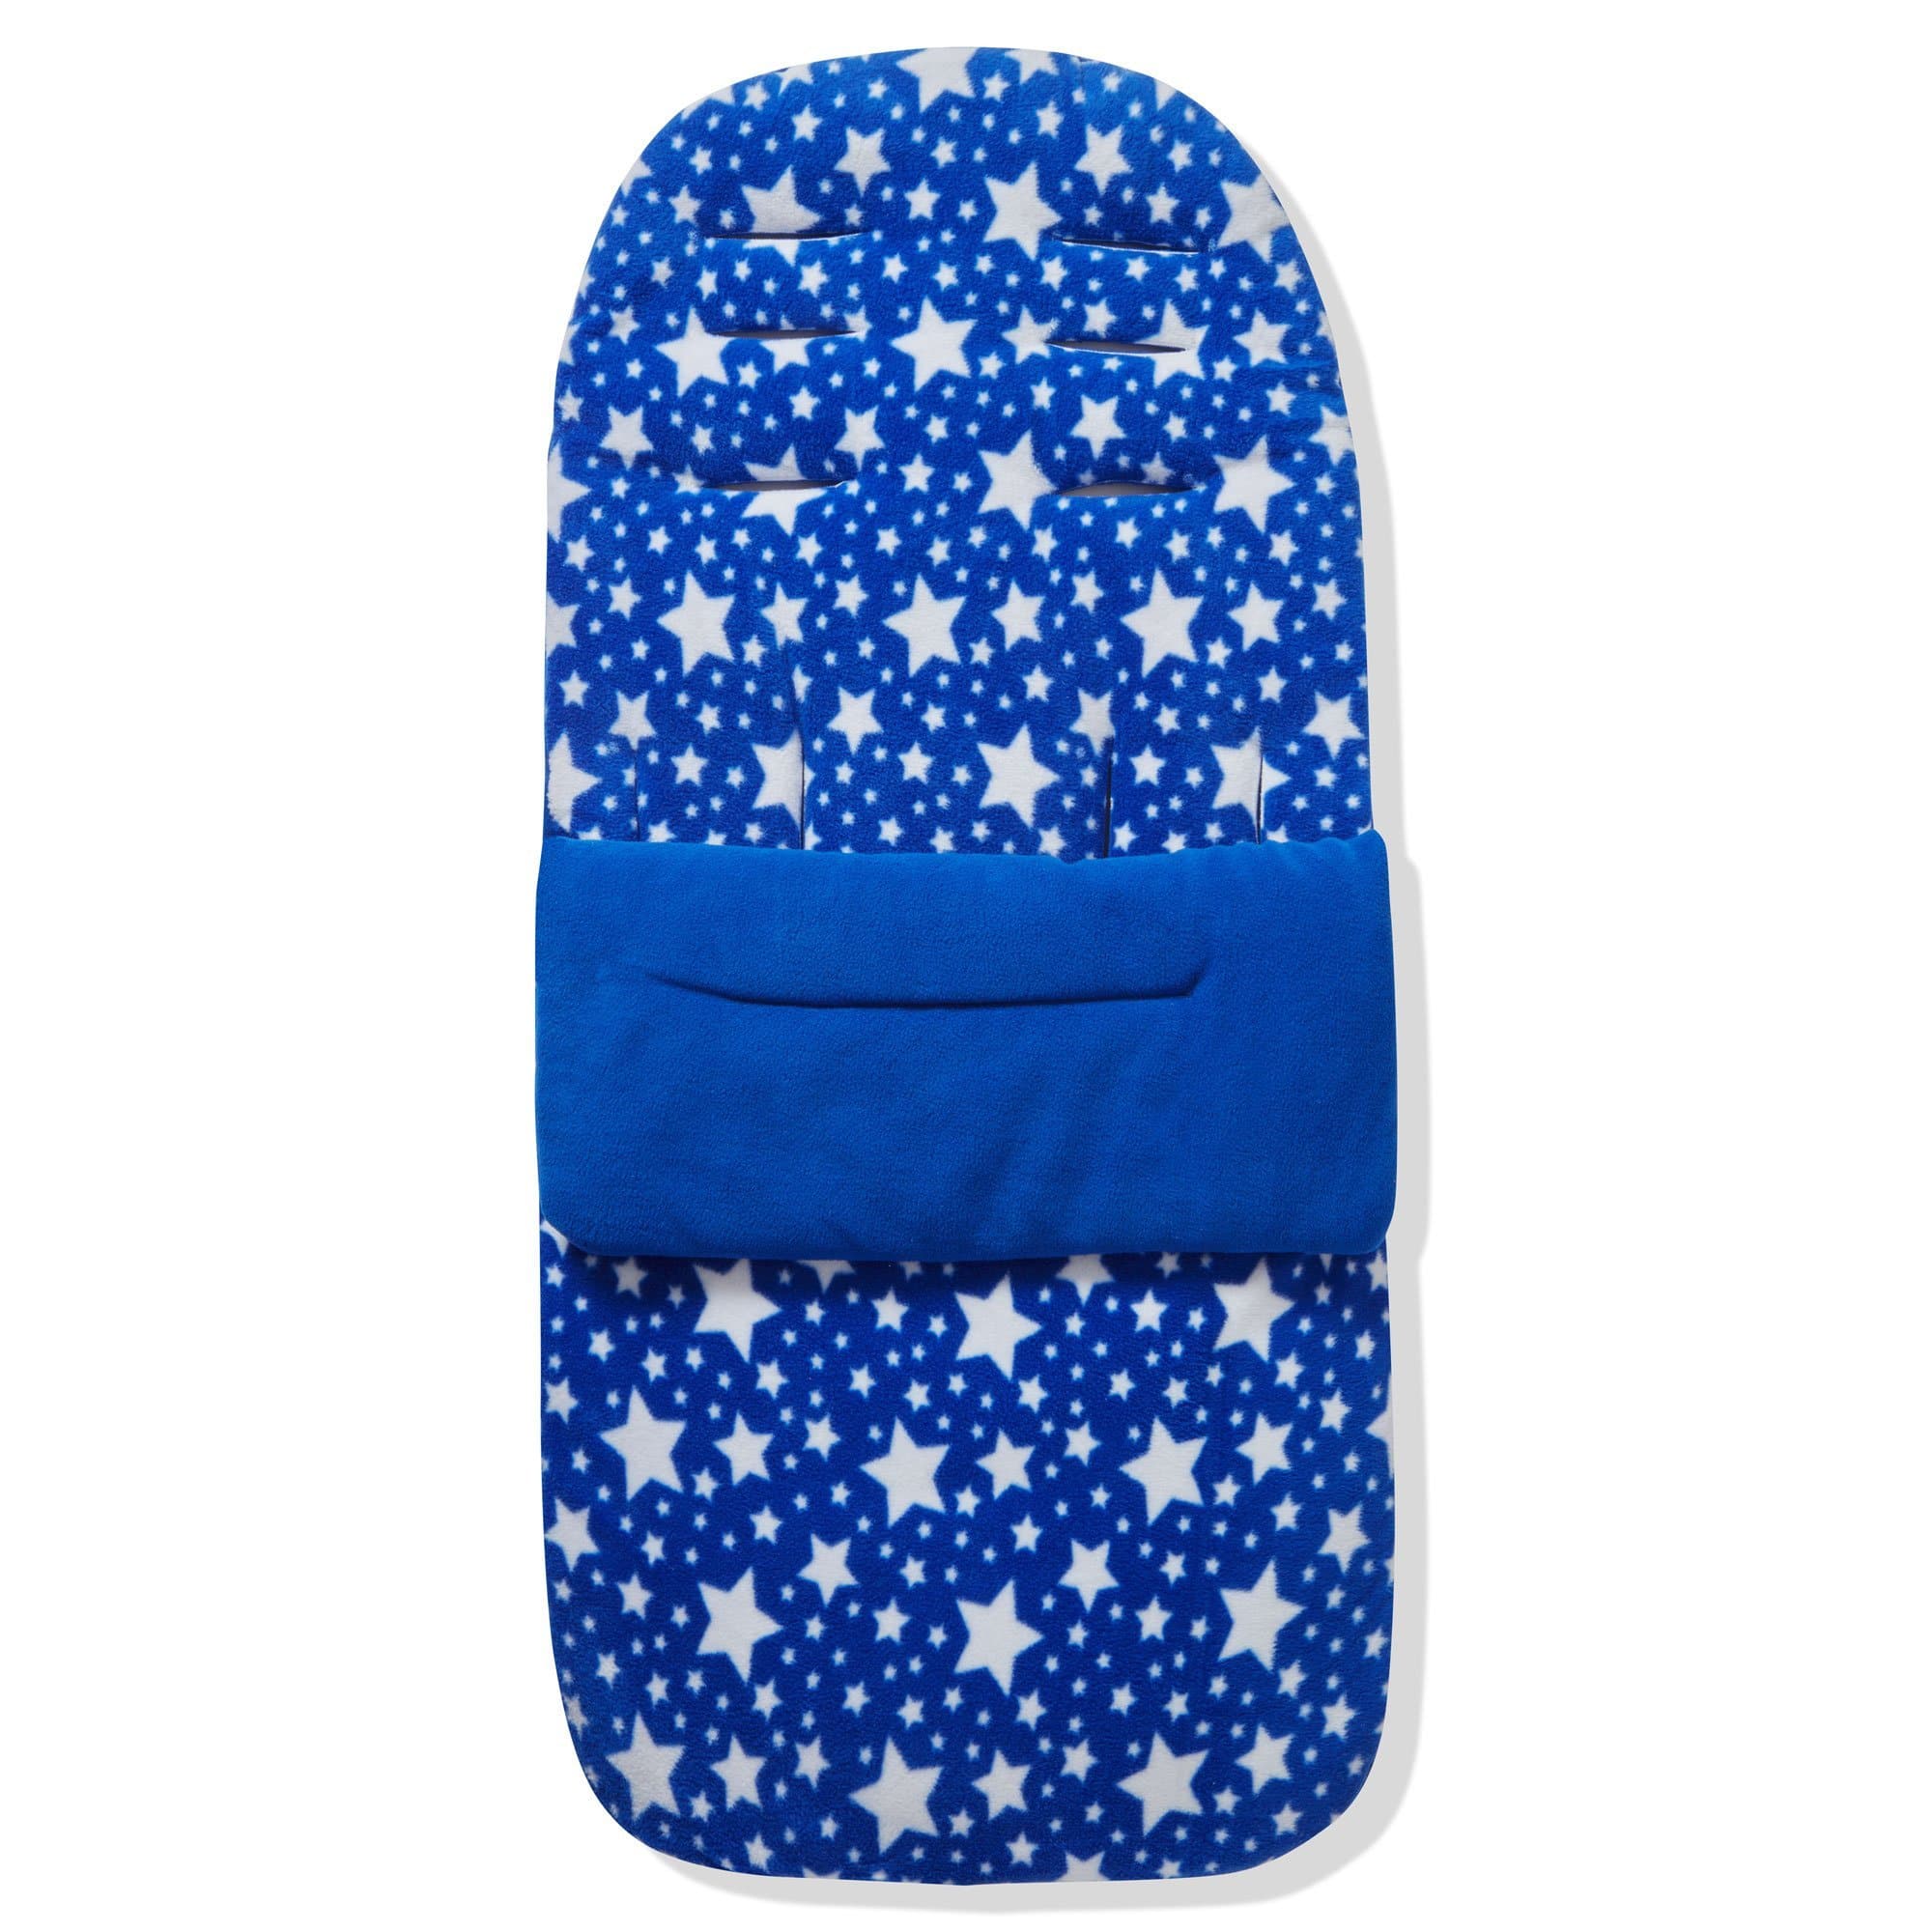 Fleece Footmuff / Cosy Toes Compatible with Peg Perego - Blue Star / Fits All Models | For Your Little One